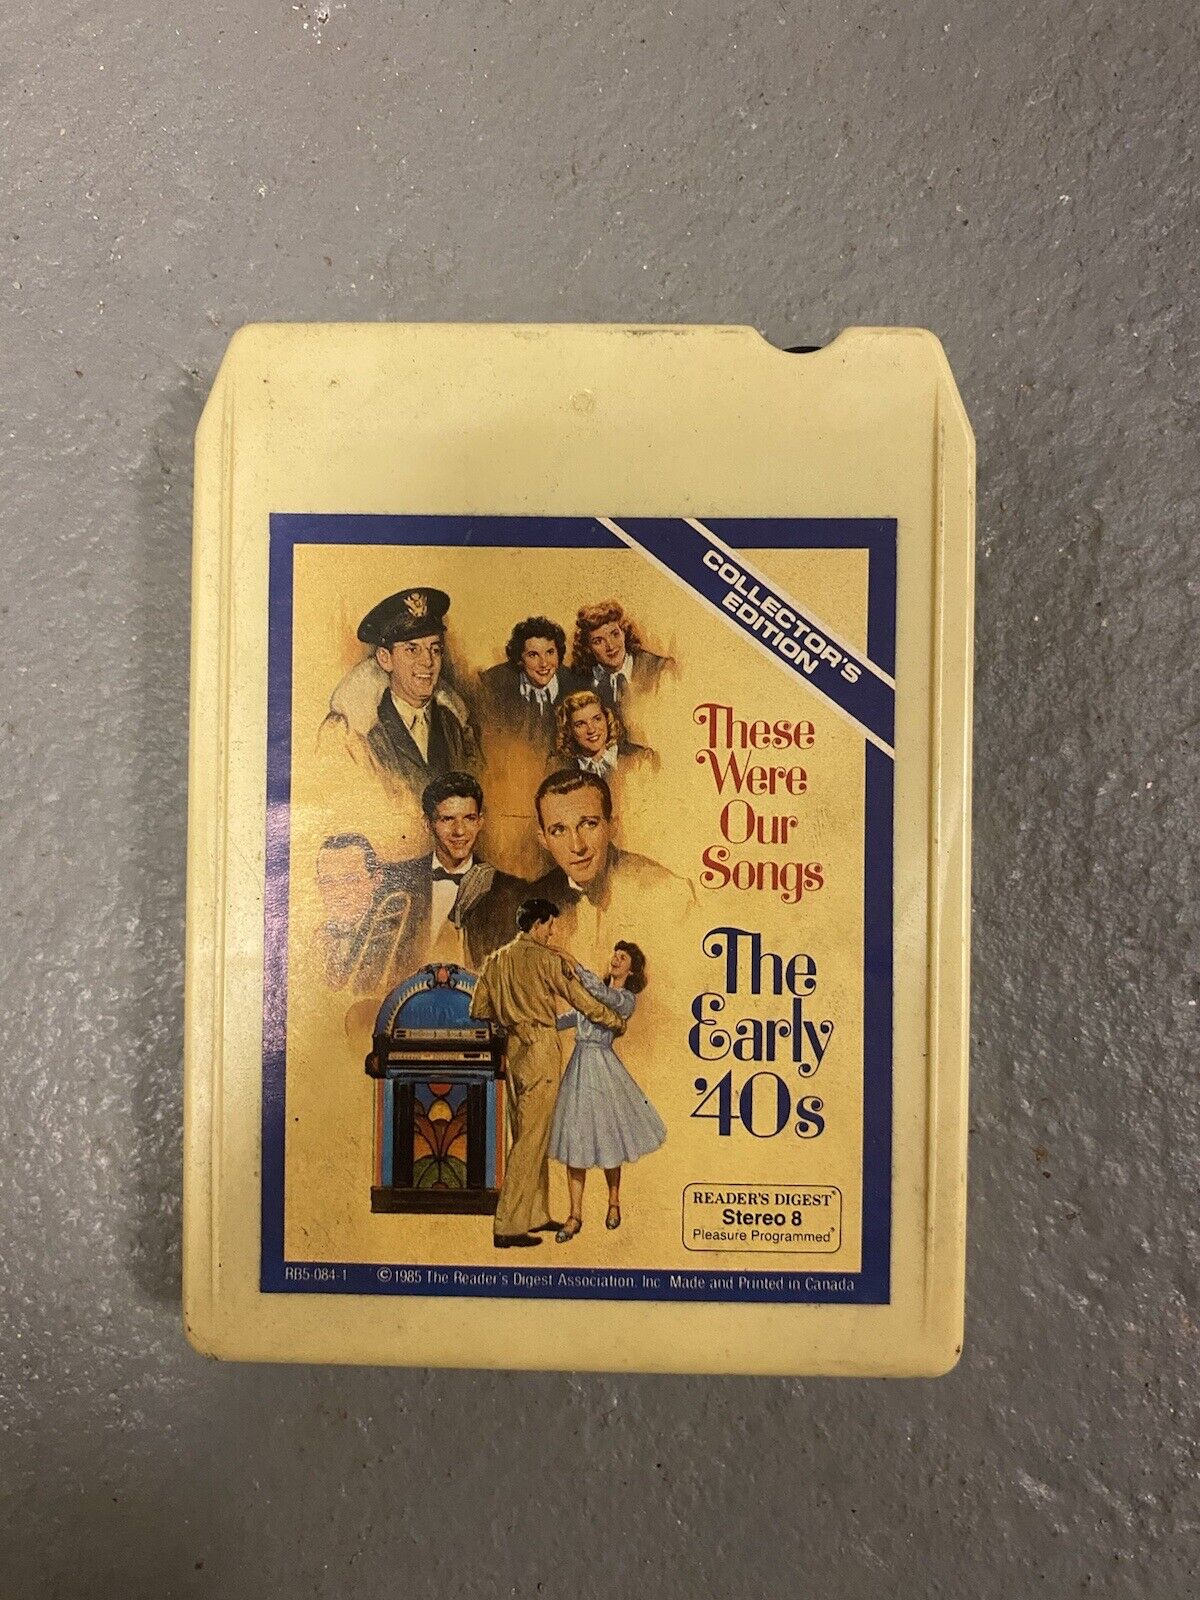 8 Track Tape RD8-5988 Various THESE WERE OUR SONGS The Early 40\'s Tape 2 602A